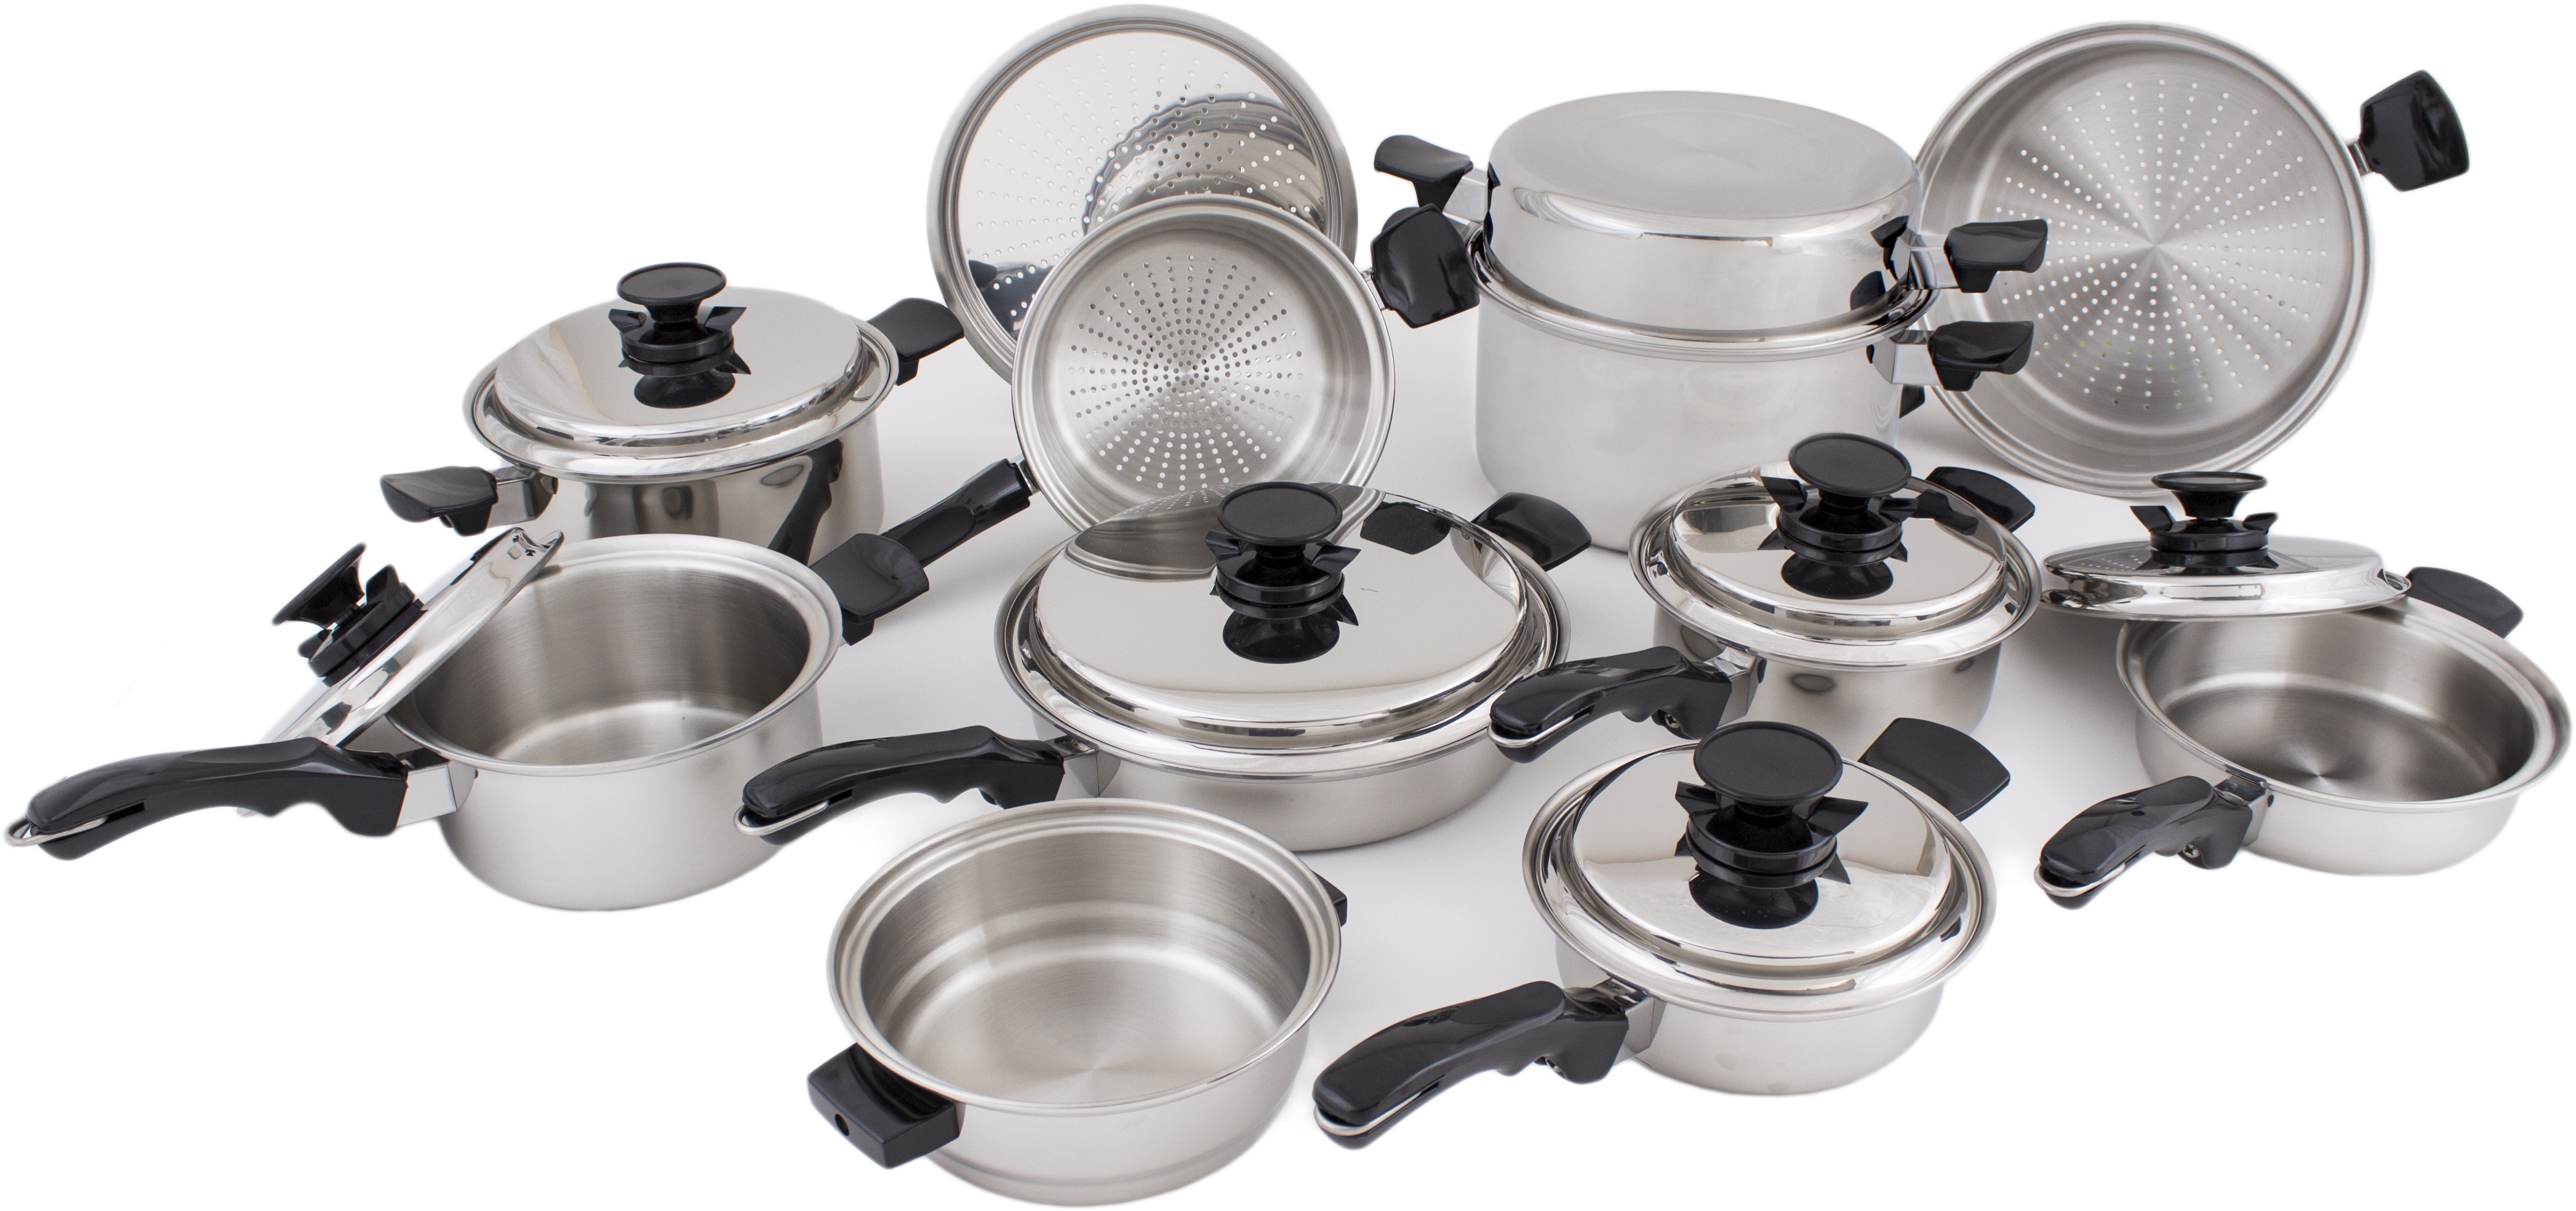 Discover More About Emdeko Waterless Cookware thumbnail